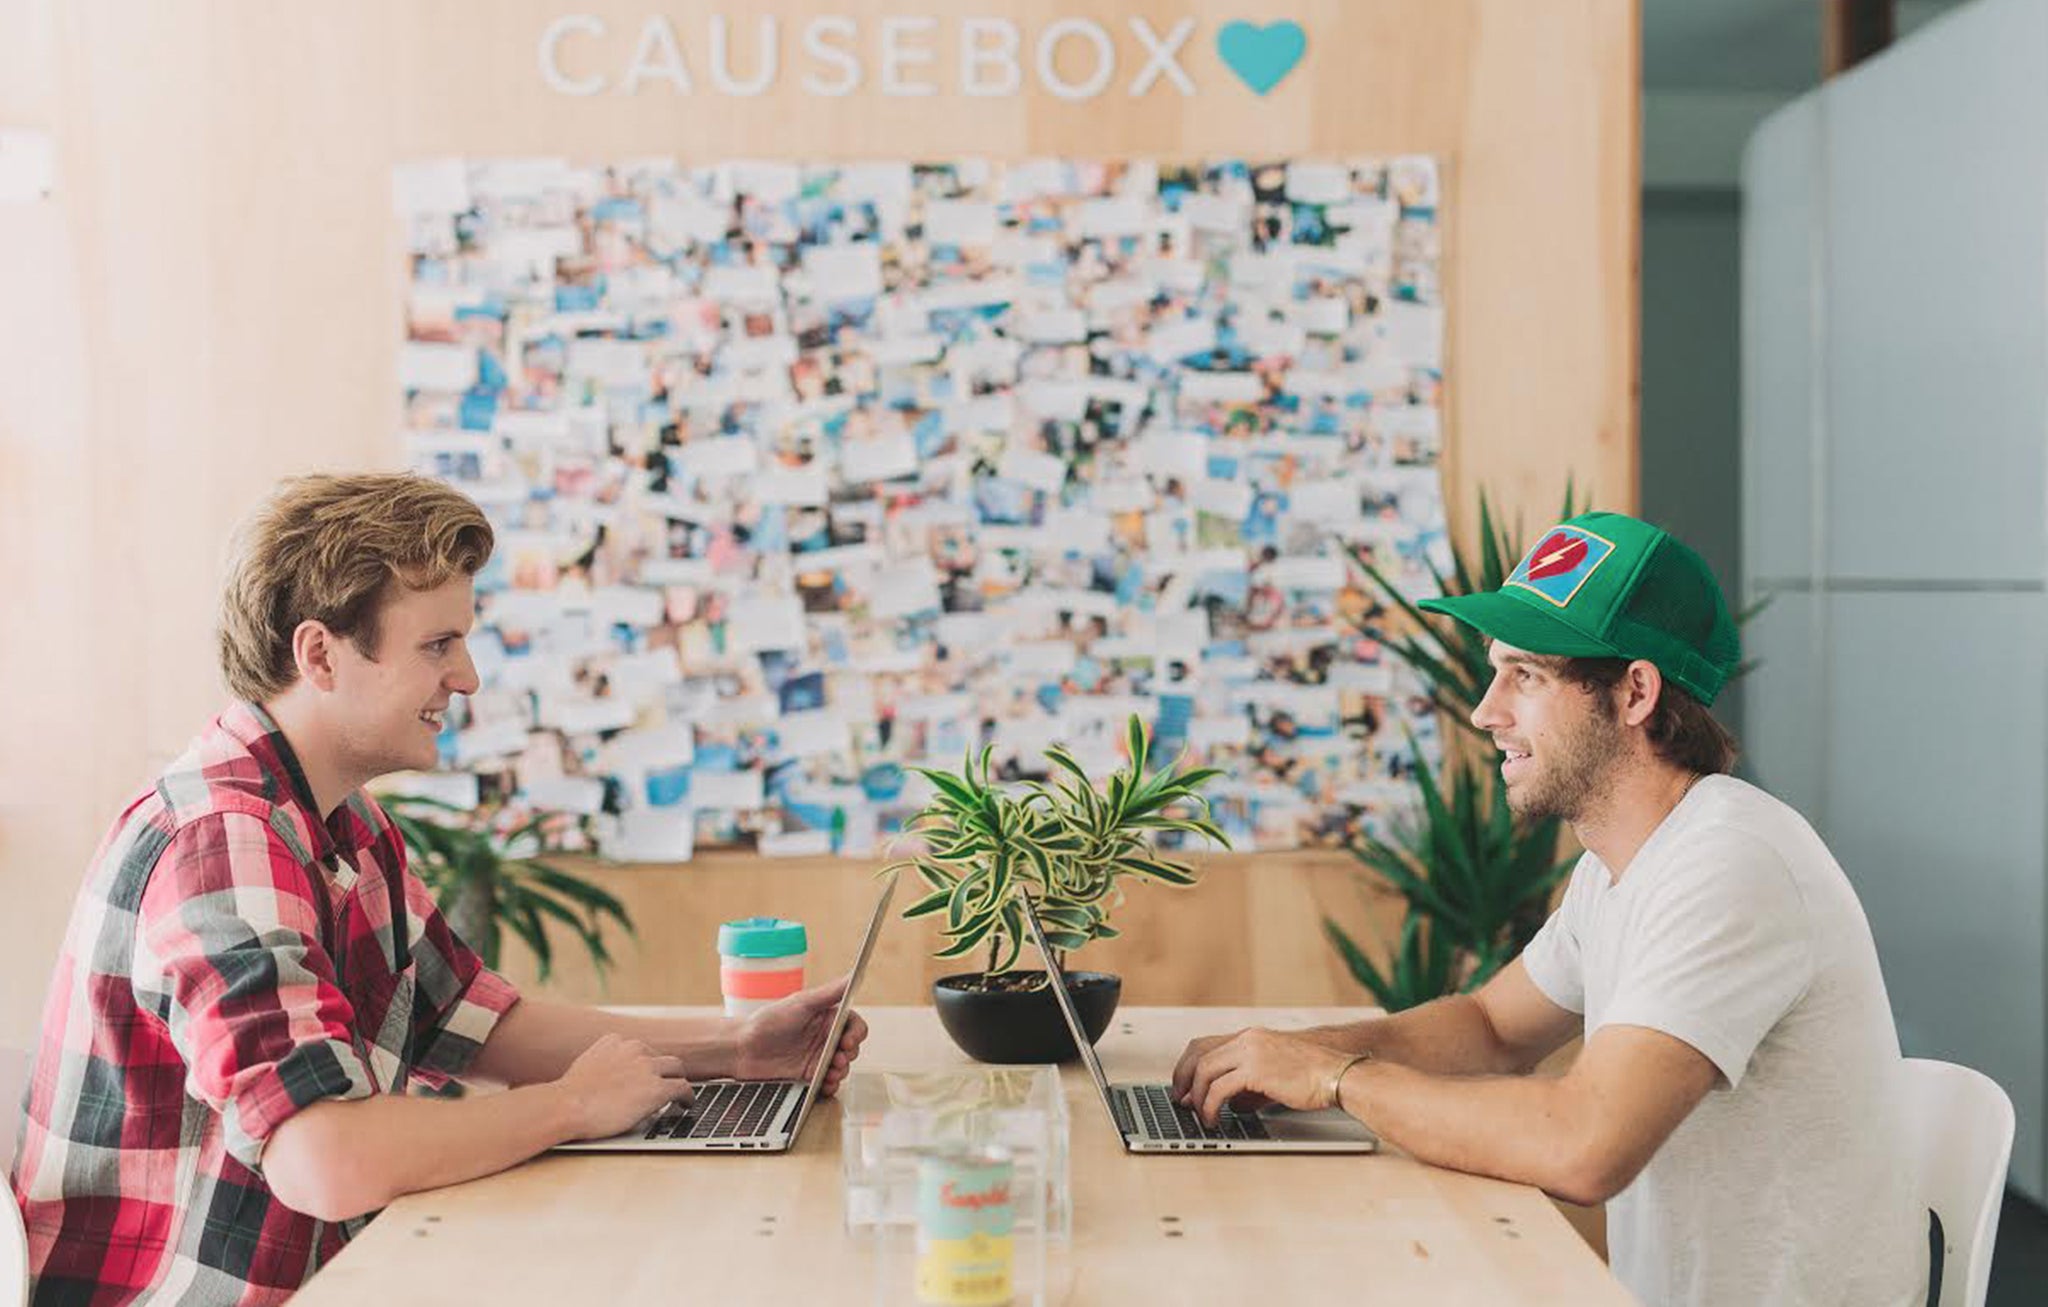 CAUSEBOX, co-founders